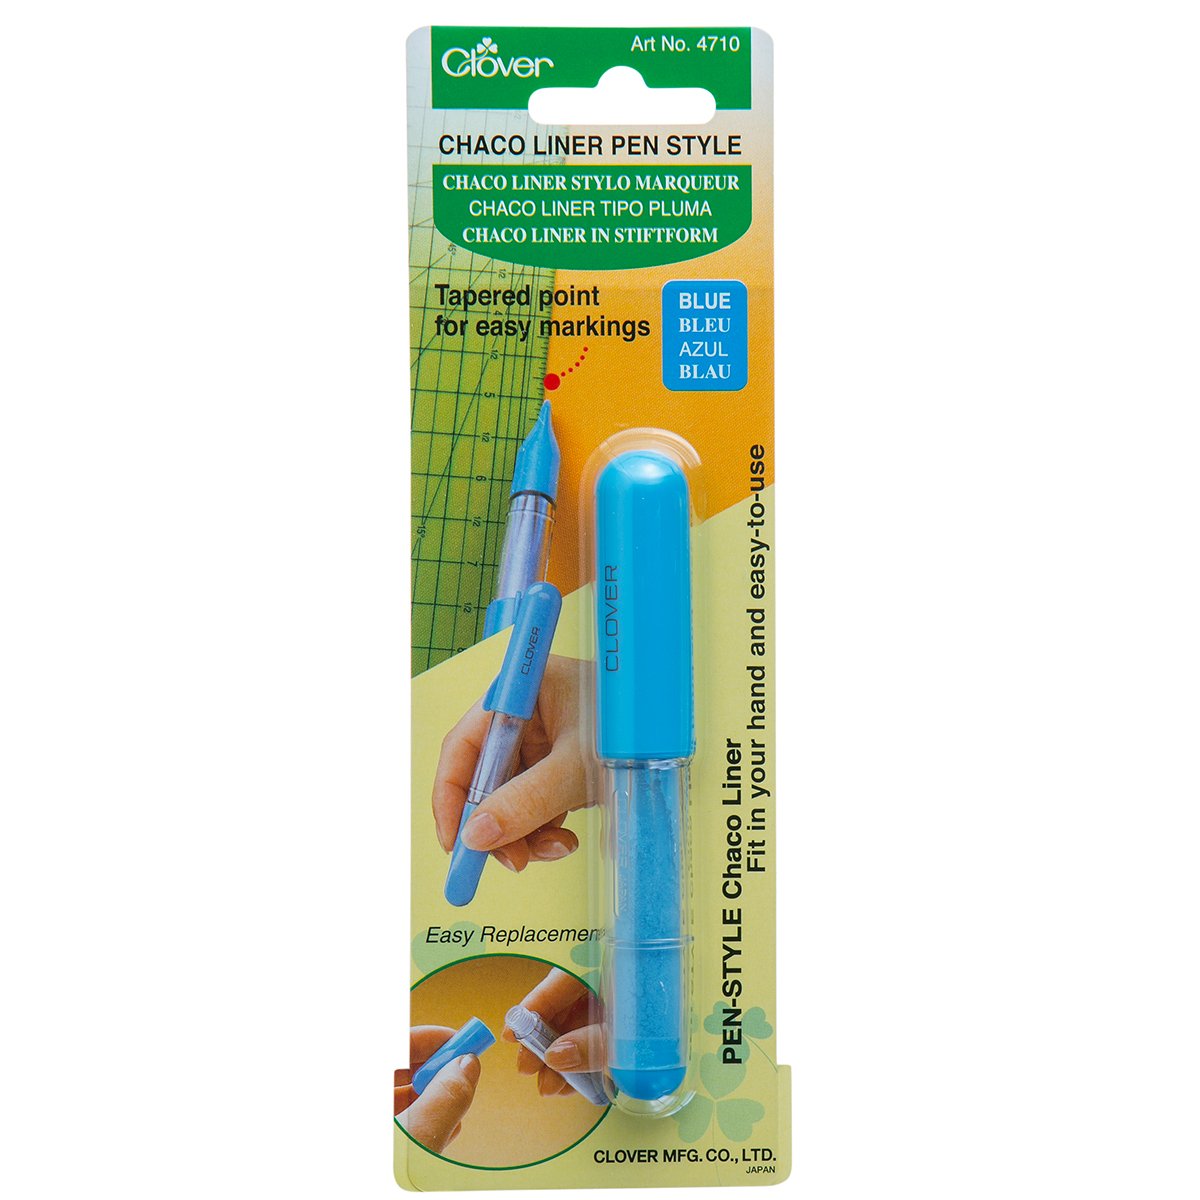 CLV - Chaco Liner Pen Style (Blue)